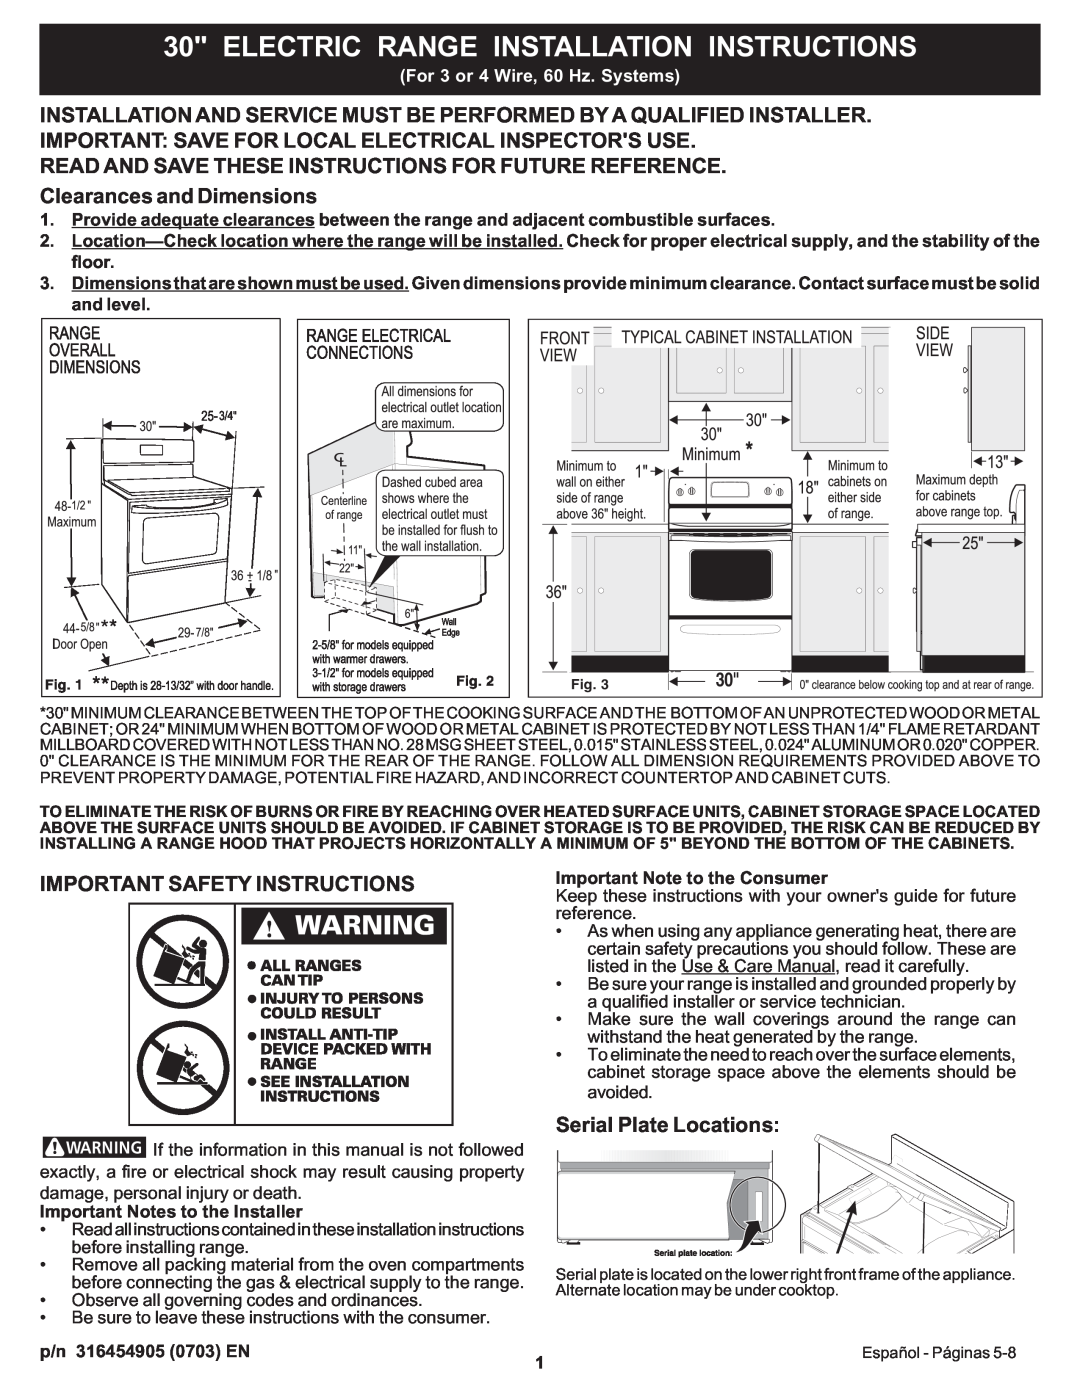 Frigidaire important safety instructions Electric Range Installation Instructions, p/n 316454905 0703 EN 